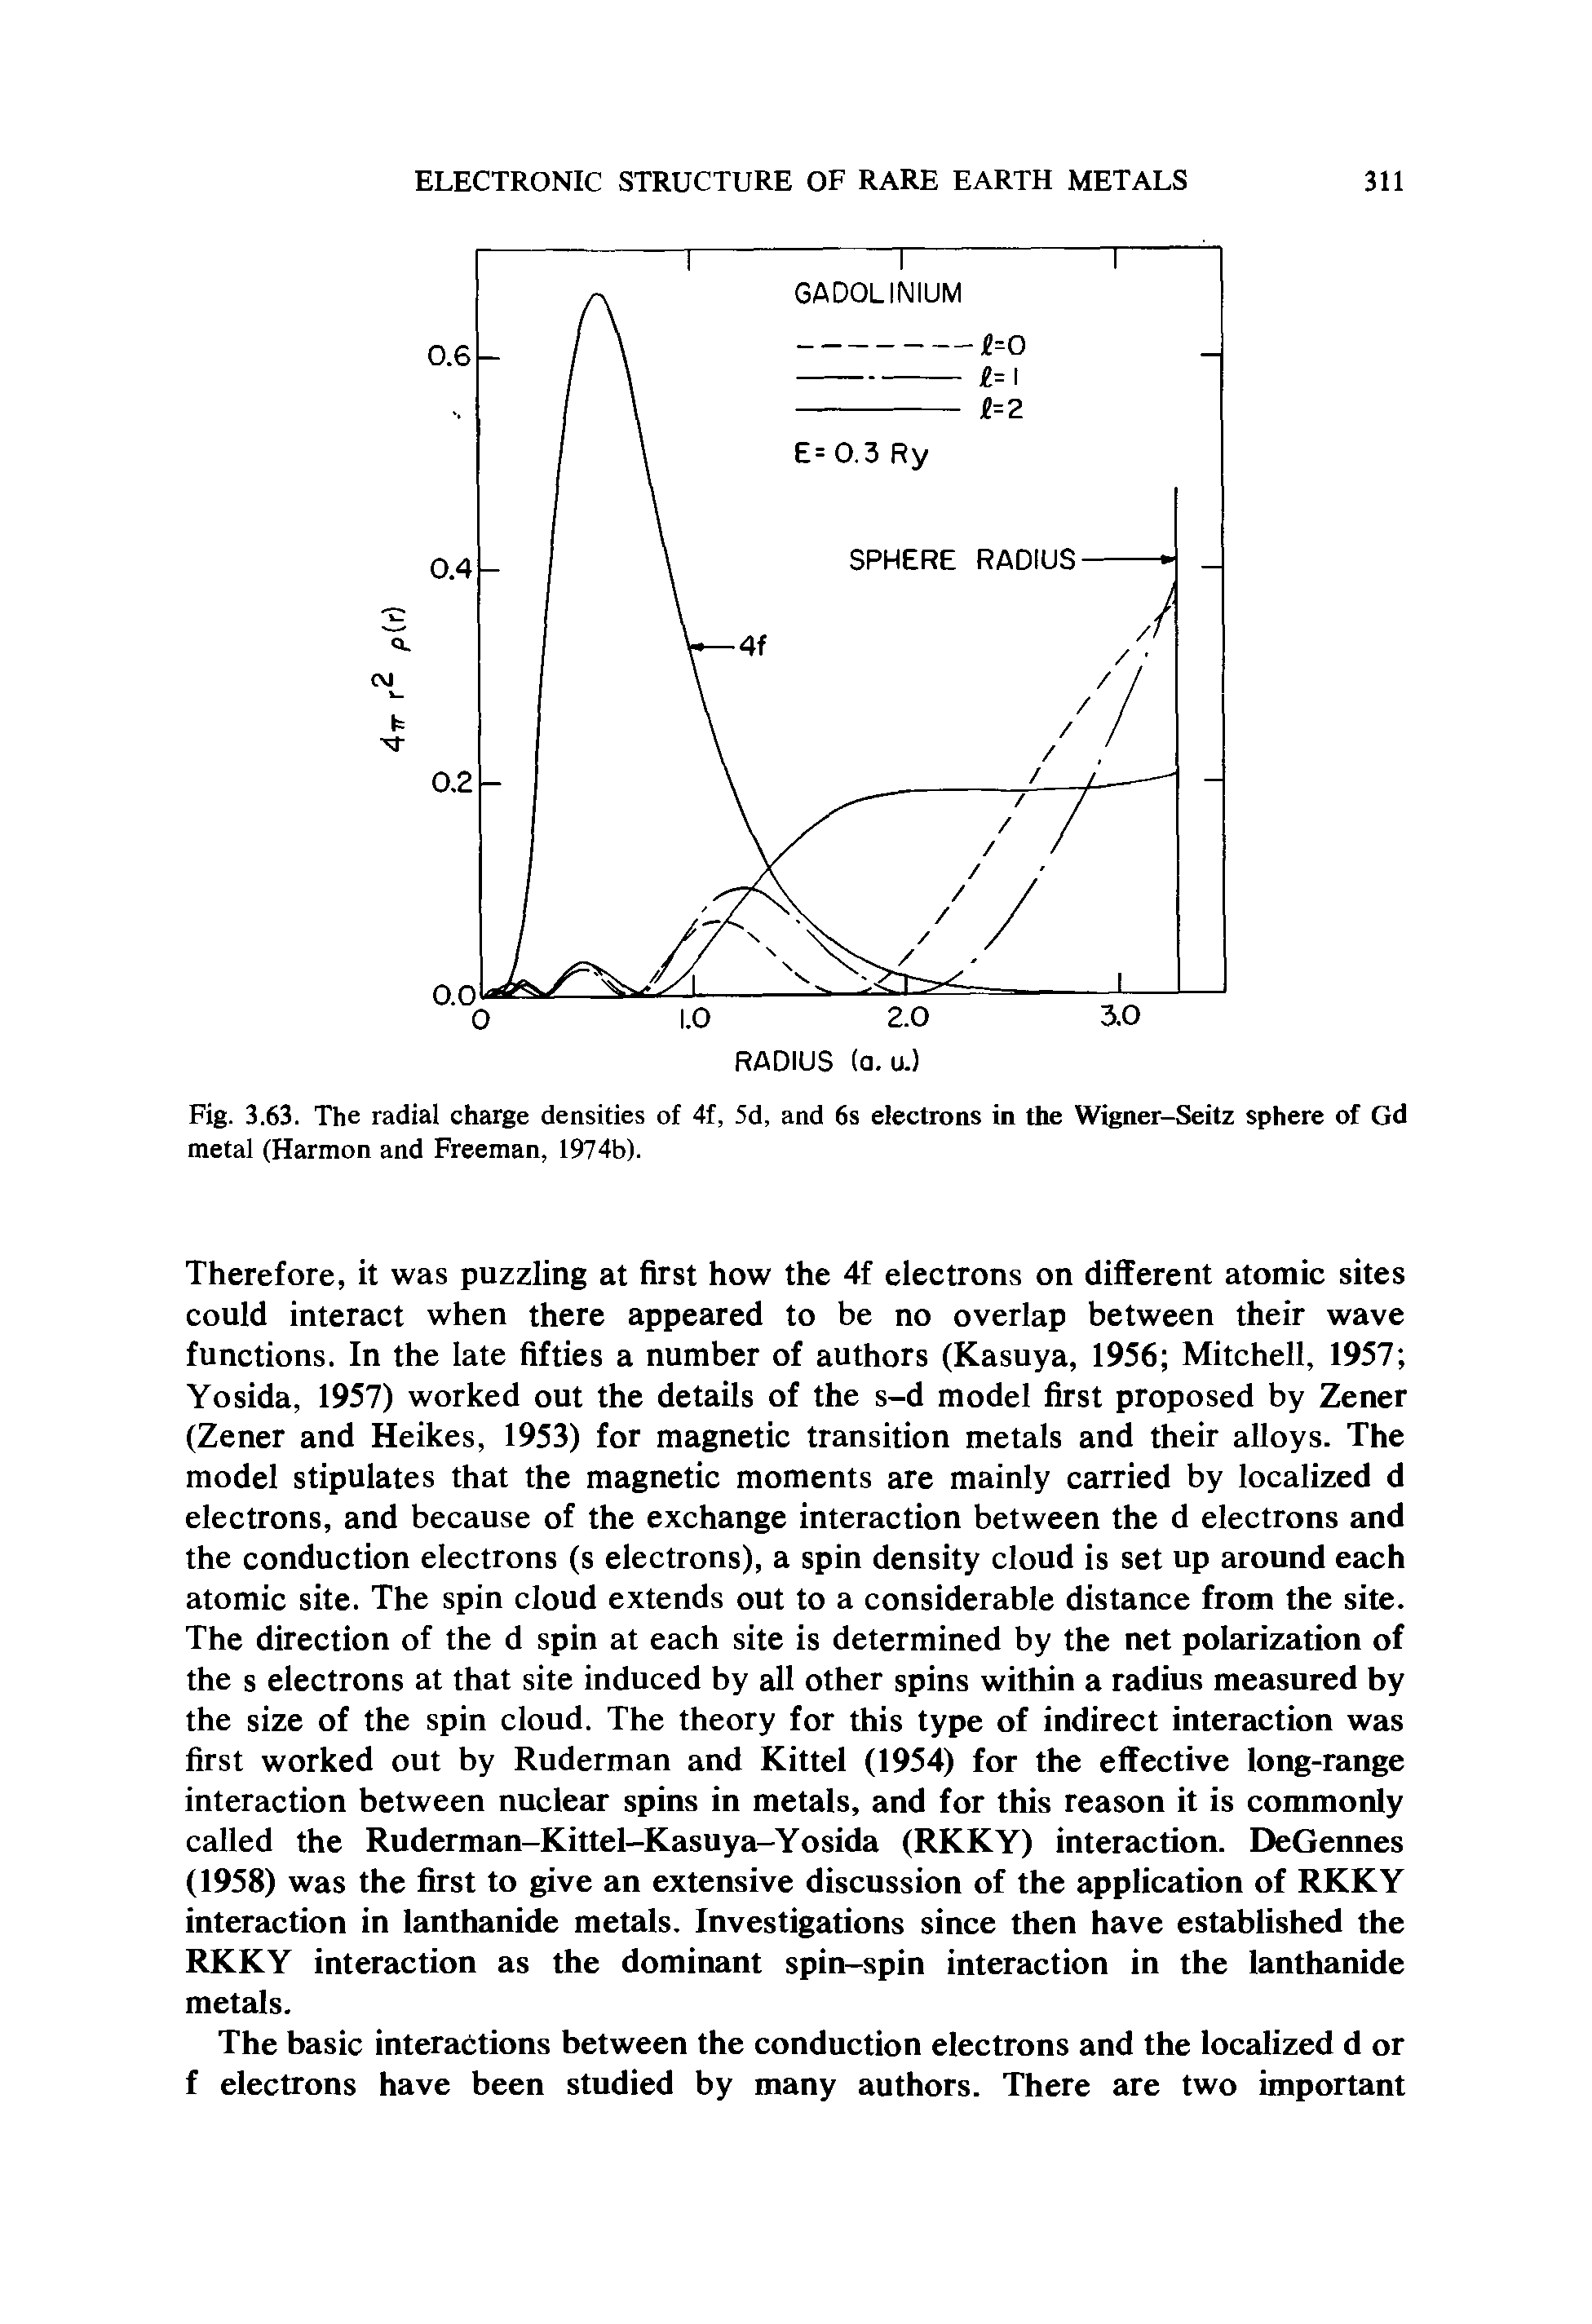 Fig. 3.63. The radial charge densities of 4f, 5d, and 6s electrons in the Wigner-Seitz sphere of Gd metal (Harmon and Freeman, 1974b).